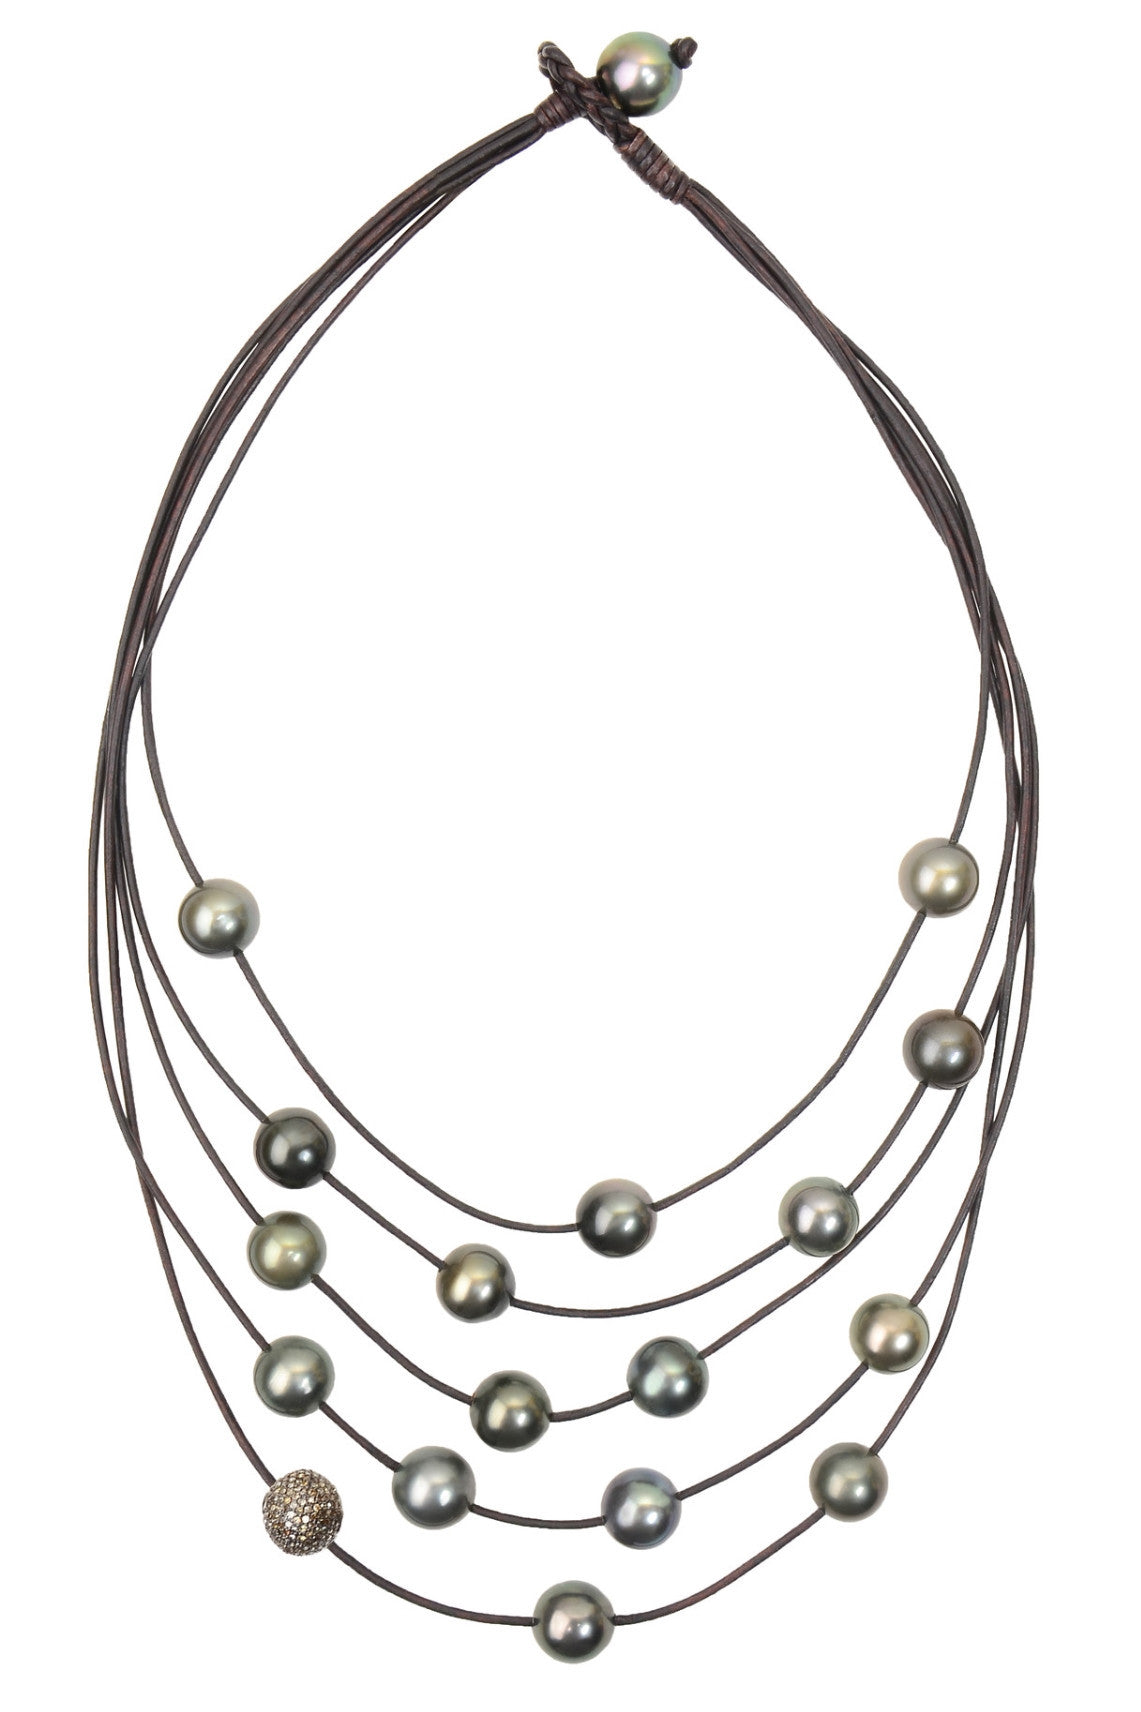 Constellation Necklace, Pavé and Tahitian Pearls - Hottest Designer Pearl and Leather Jewelry | VINCENT PEACH
